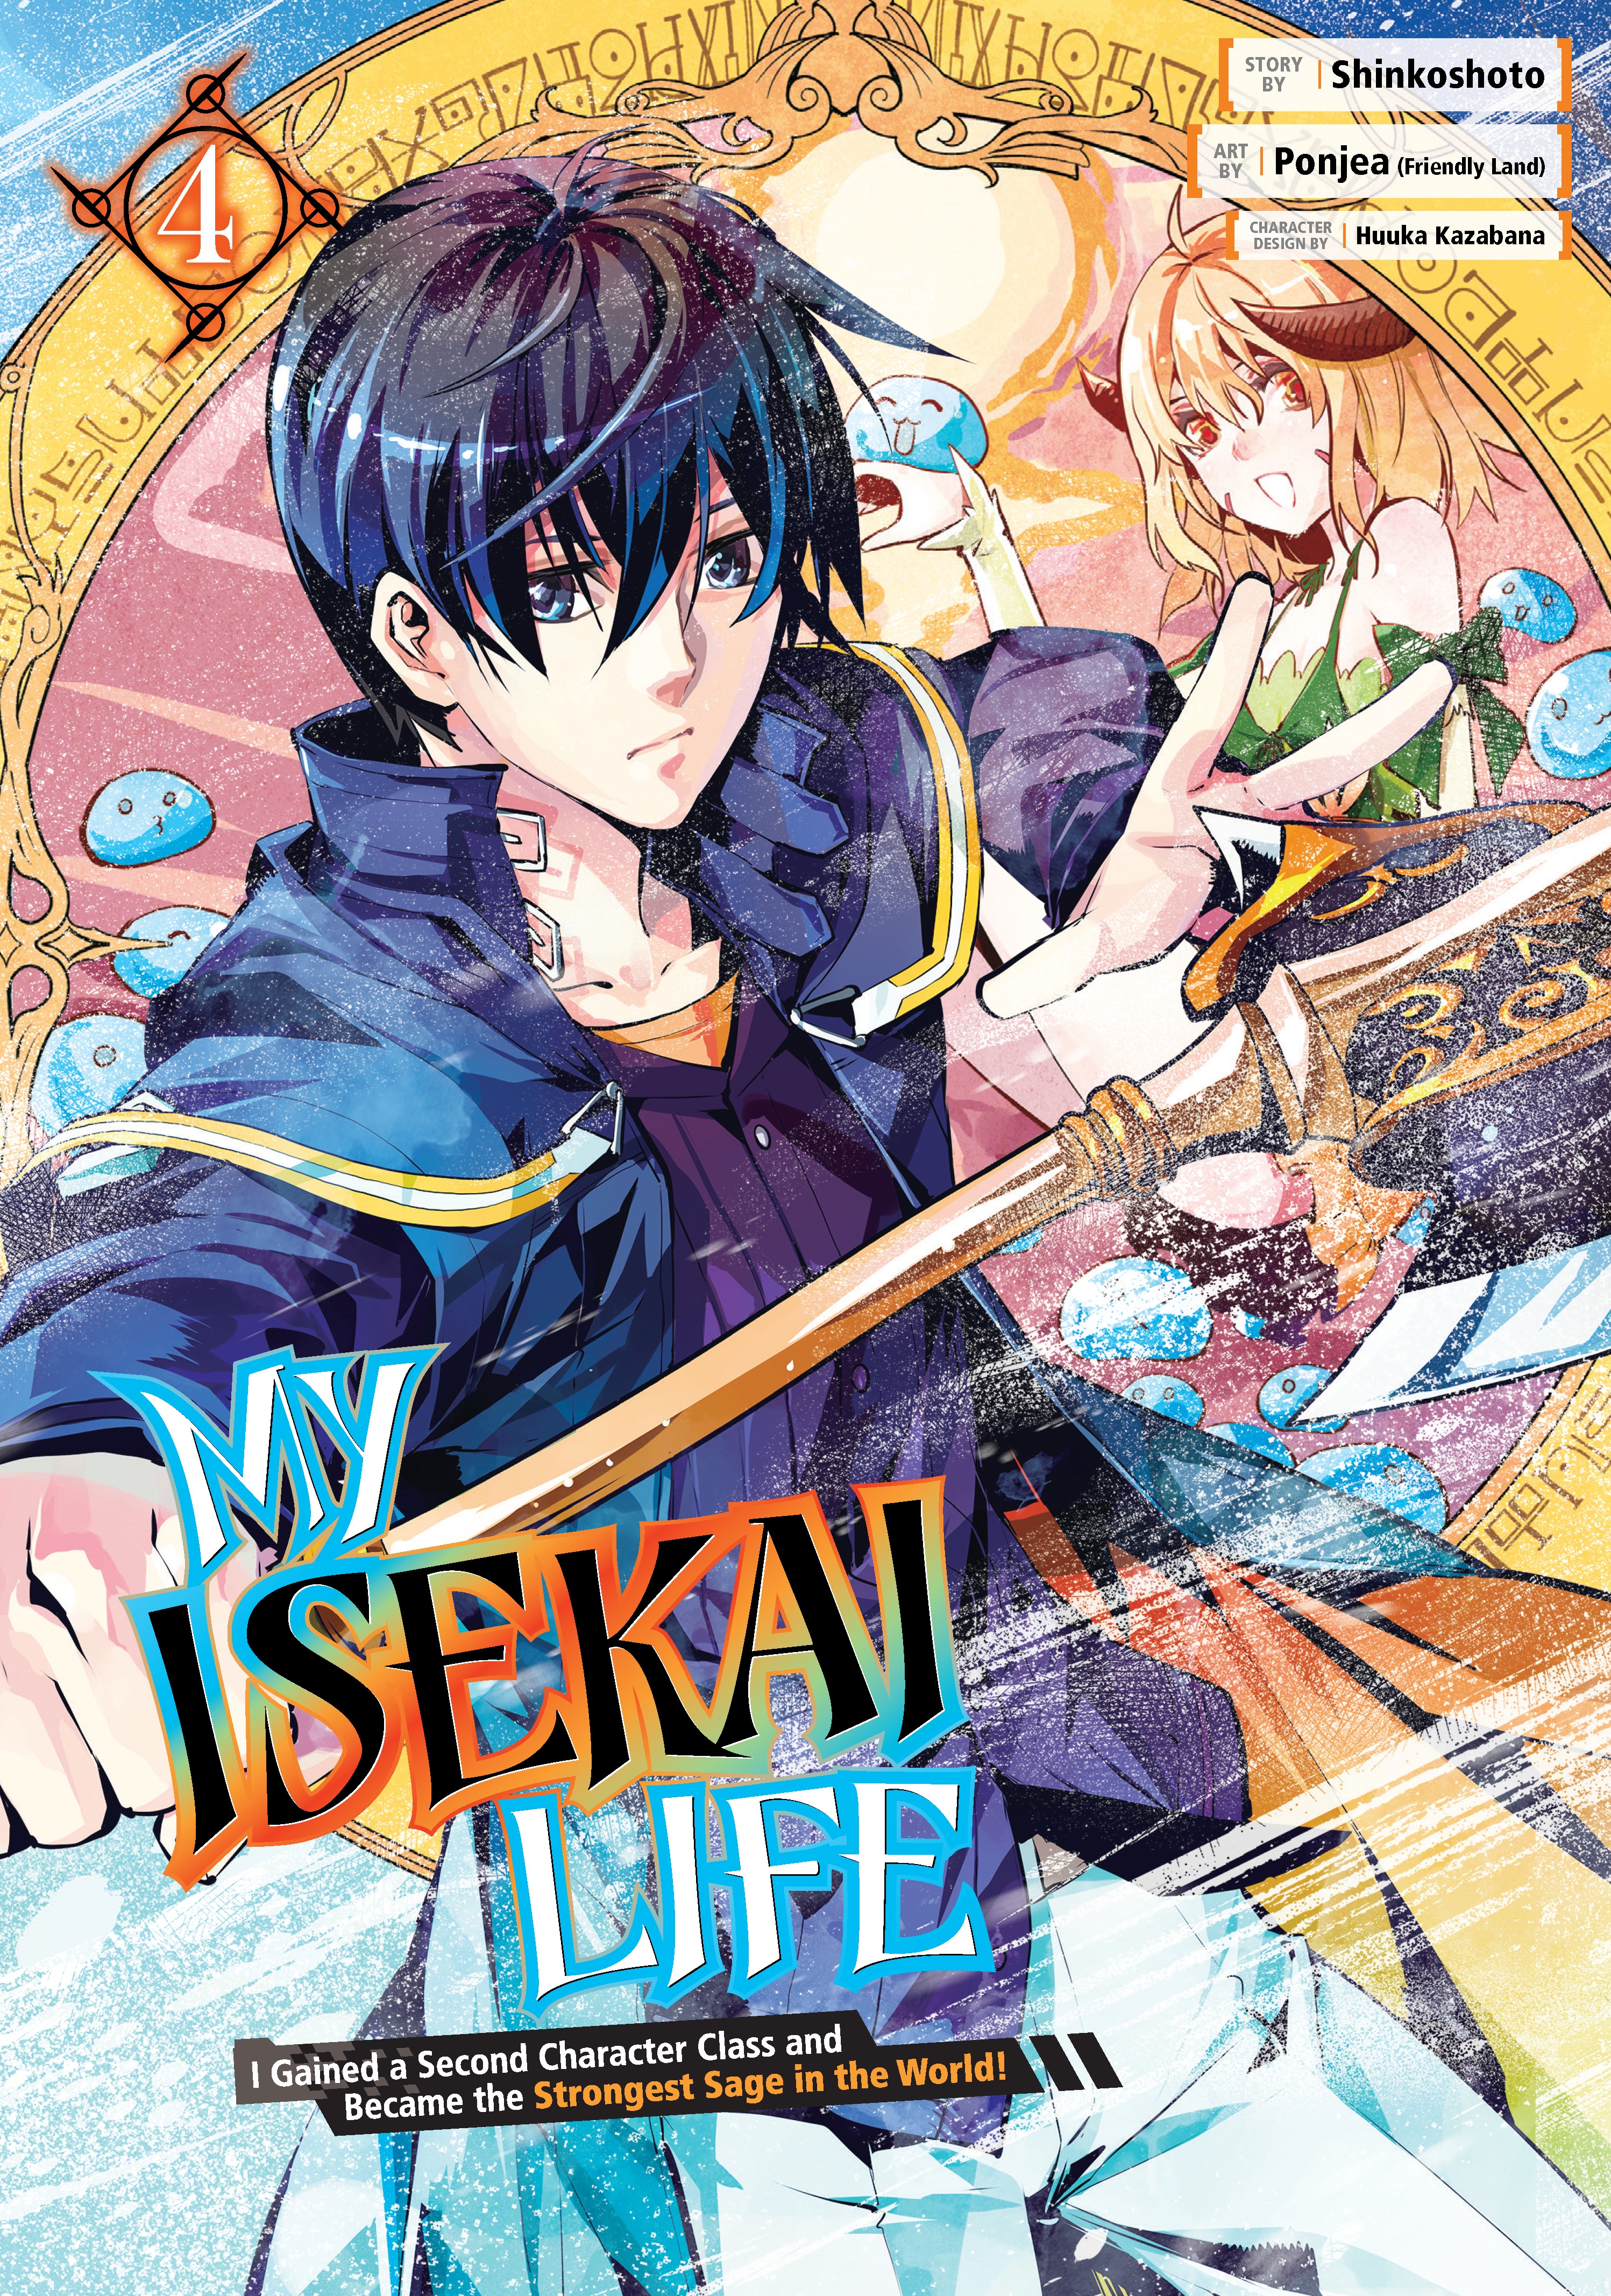 My Isekai Life: I Gained a Second Character Class and Became the Strongest  Sage in the World!